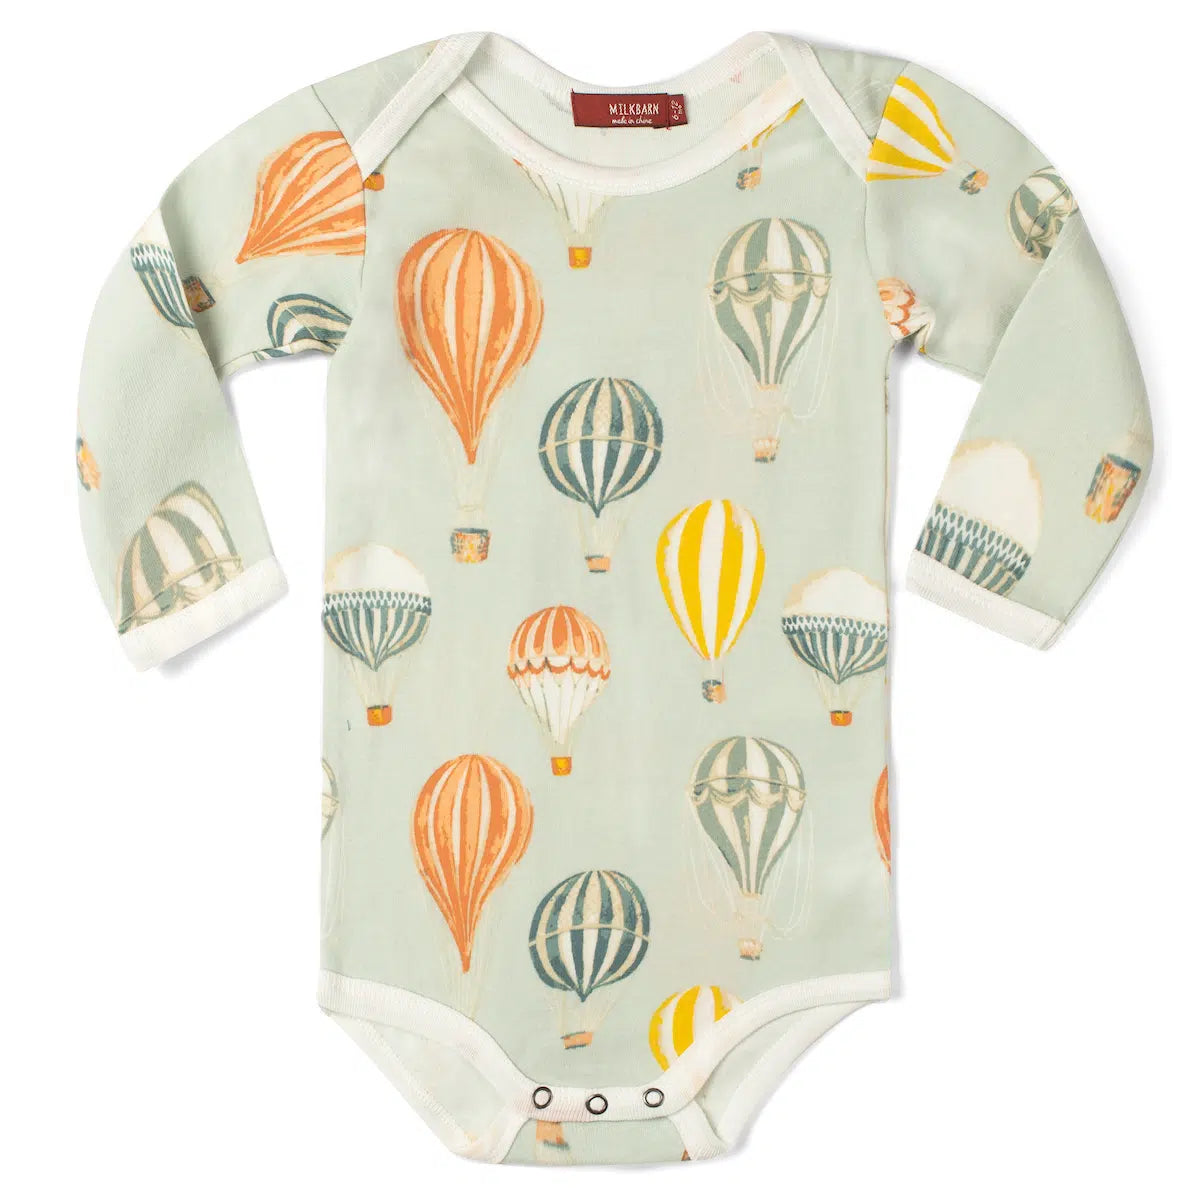 Vintage Balloons Long Sleeve One Piece